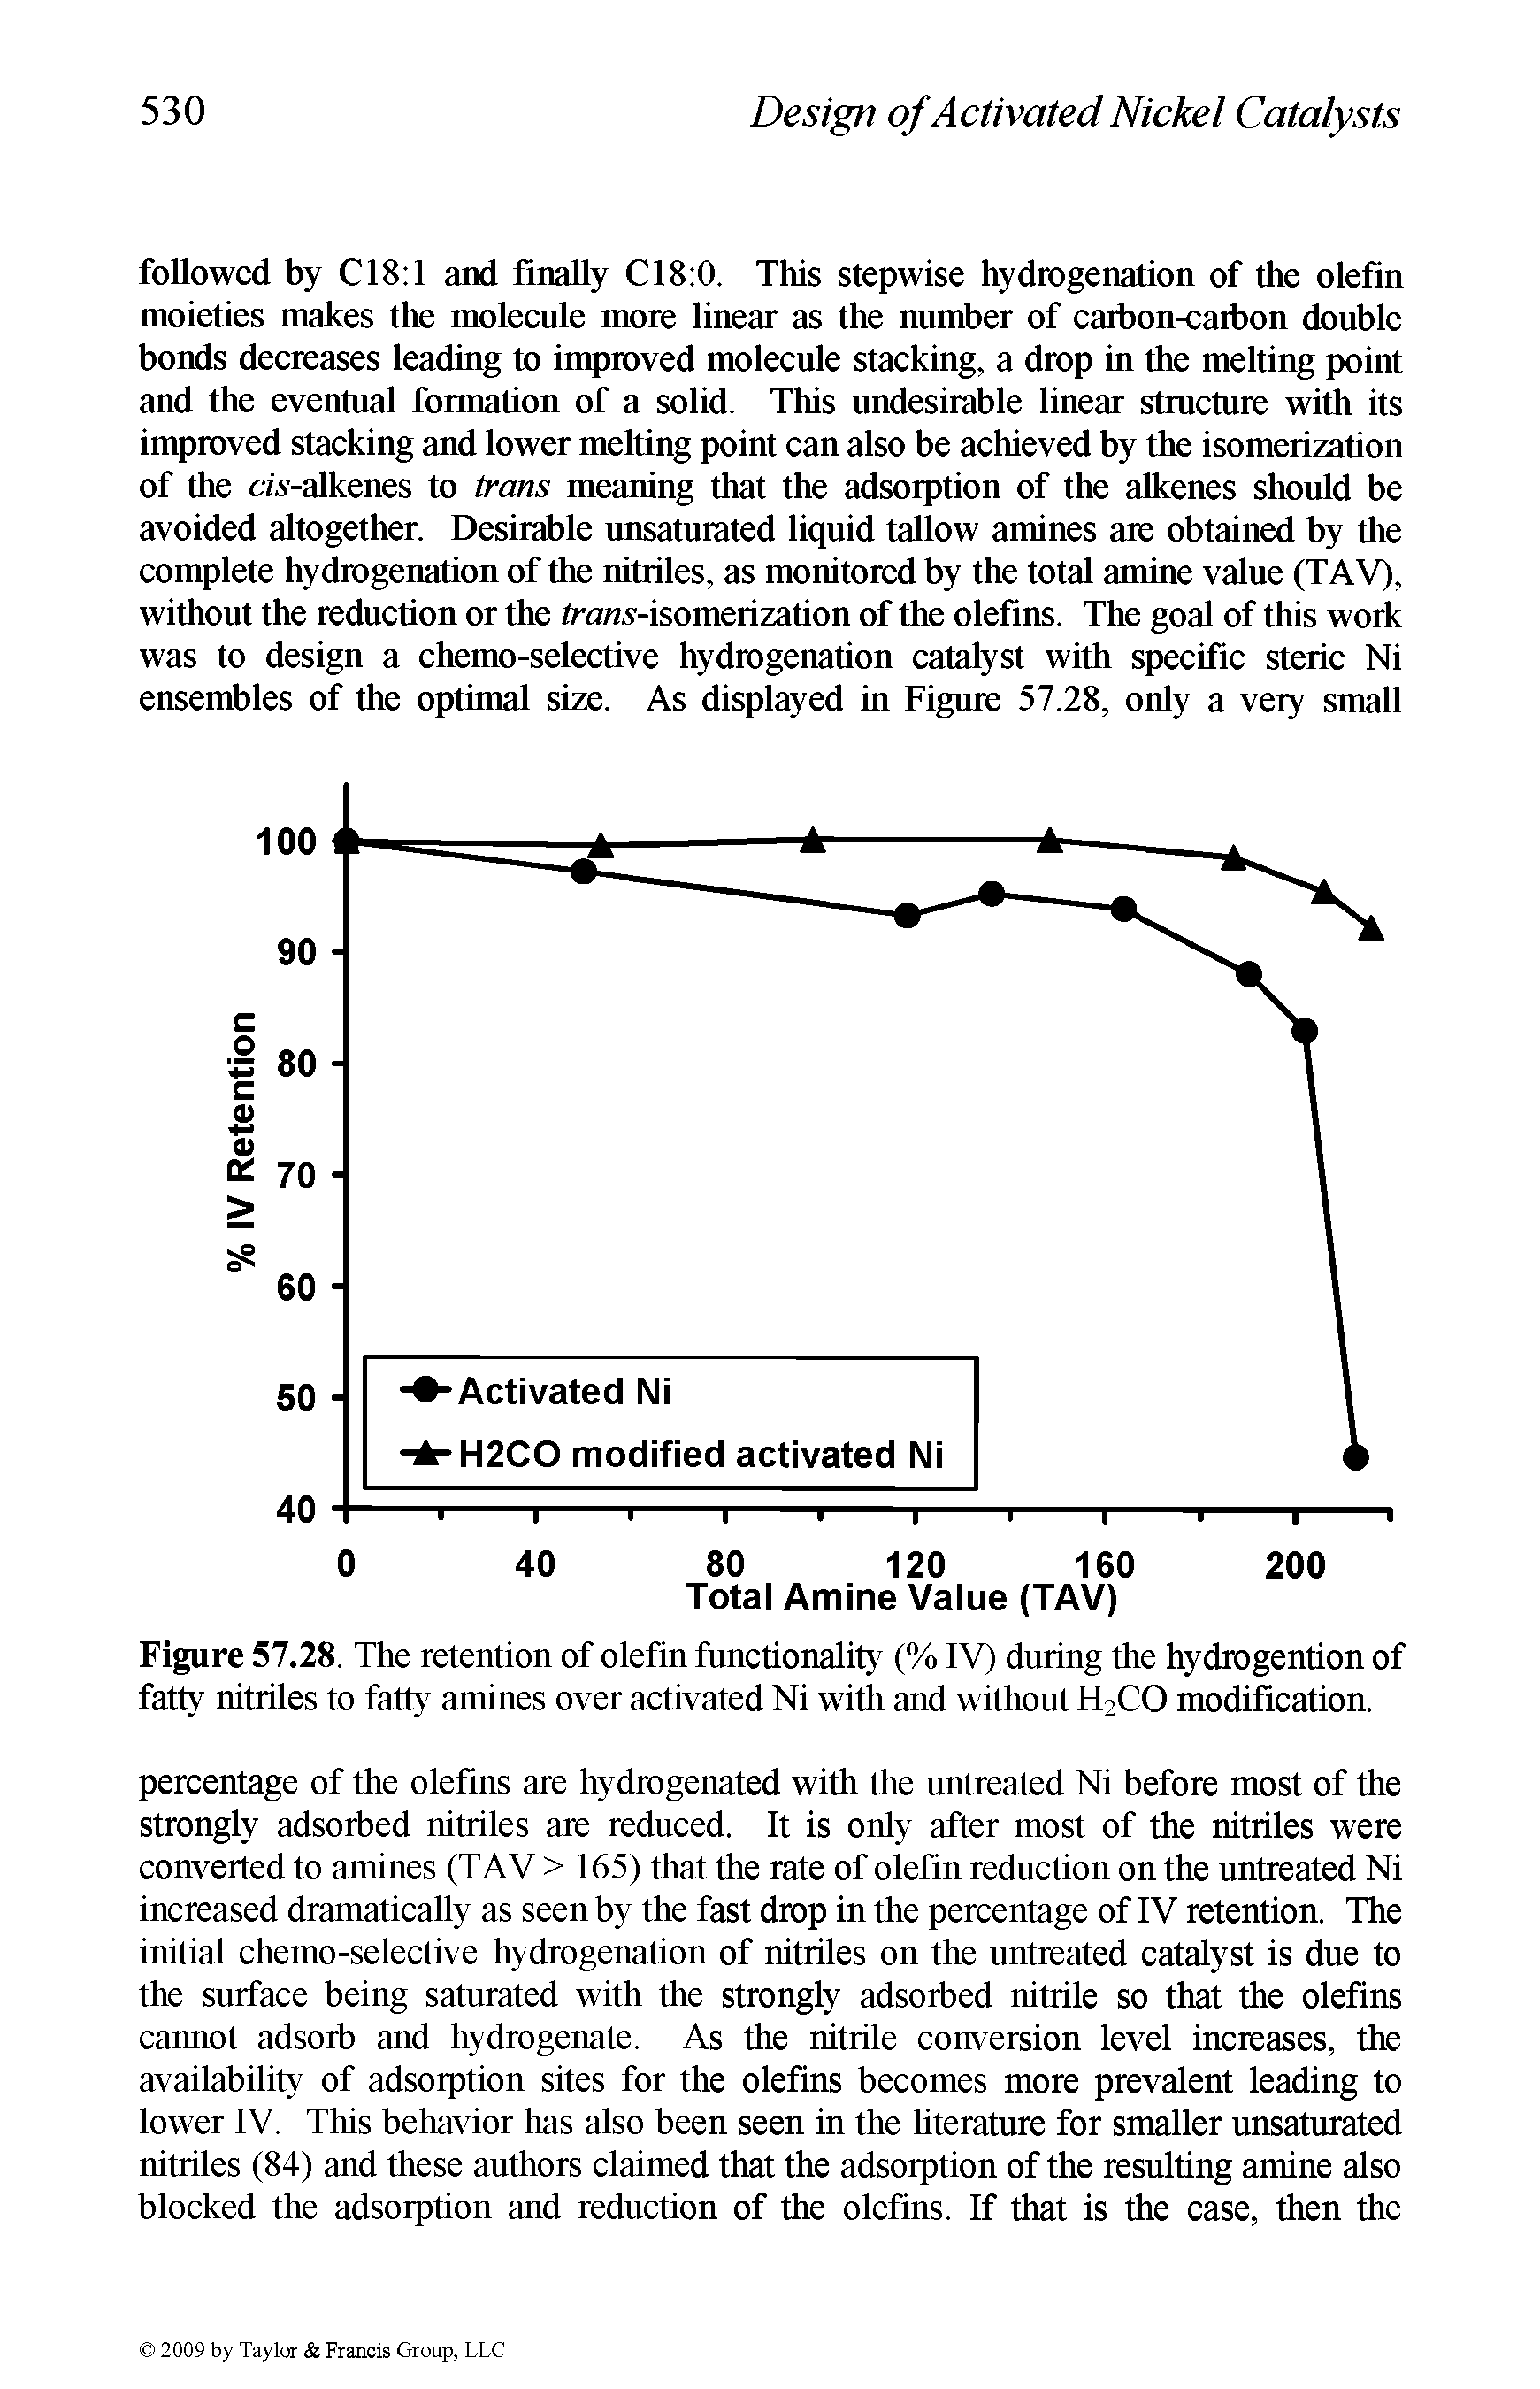 Figure 57.28. The retention of olefin functionality (% IV) during the hydrogention of fatty nitriles to fatty amines over activated Ni with and without H2CO modification.